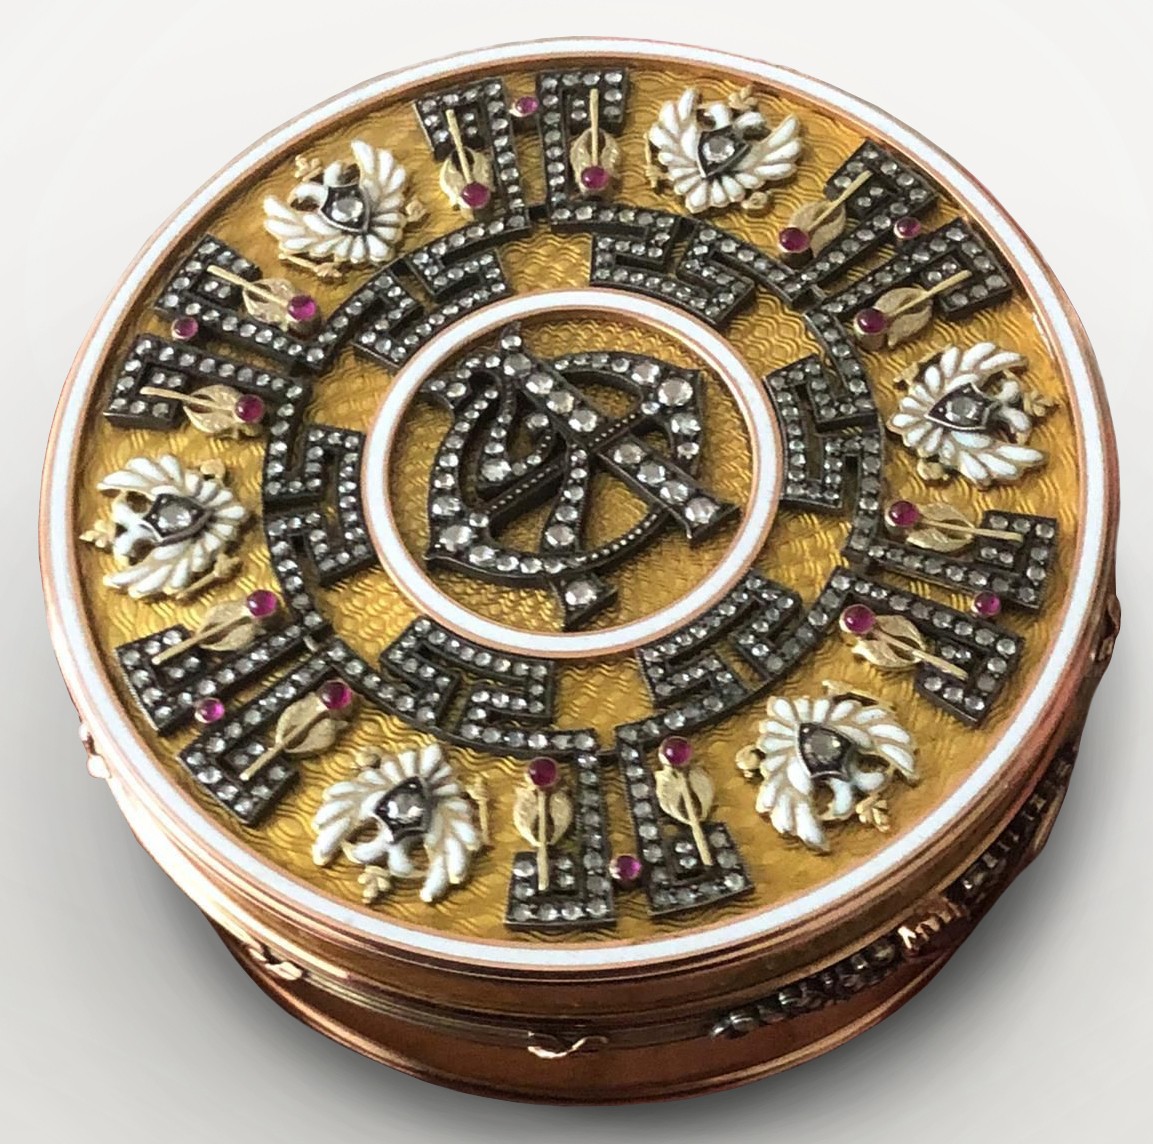 A stunning piece of art made from solid 14CT Gold and inlaid with Genuine Diamonds and Rubies - Image 5 of 8